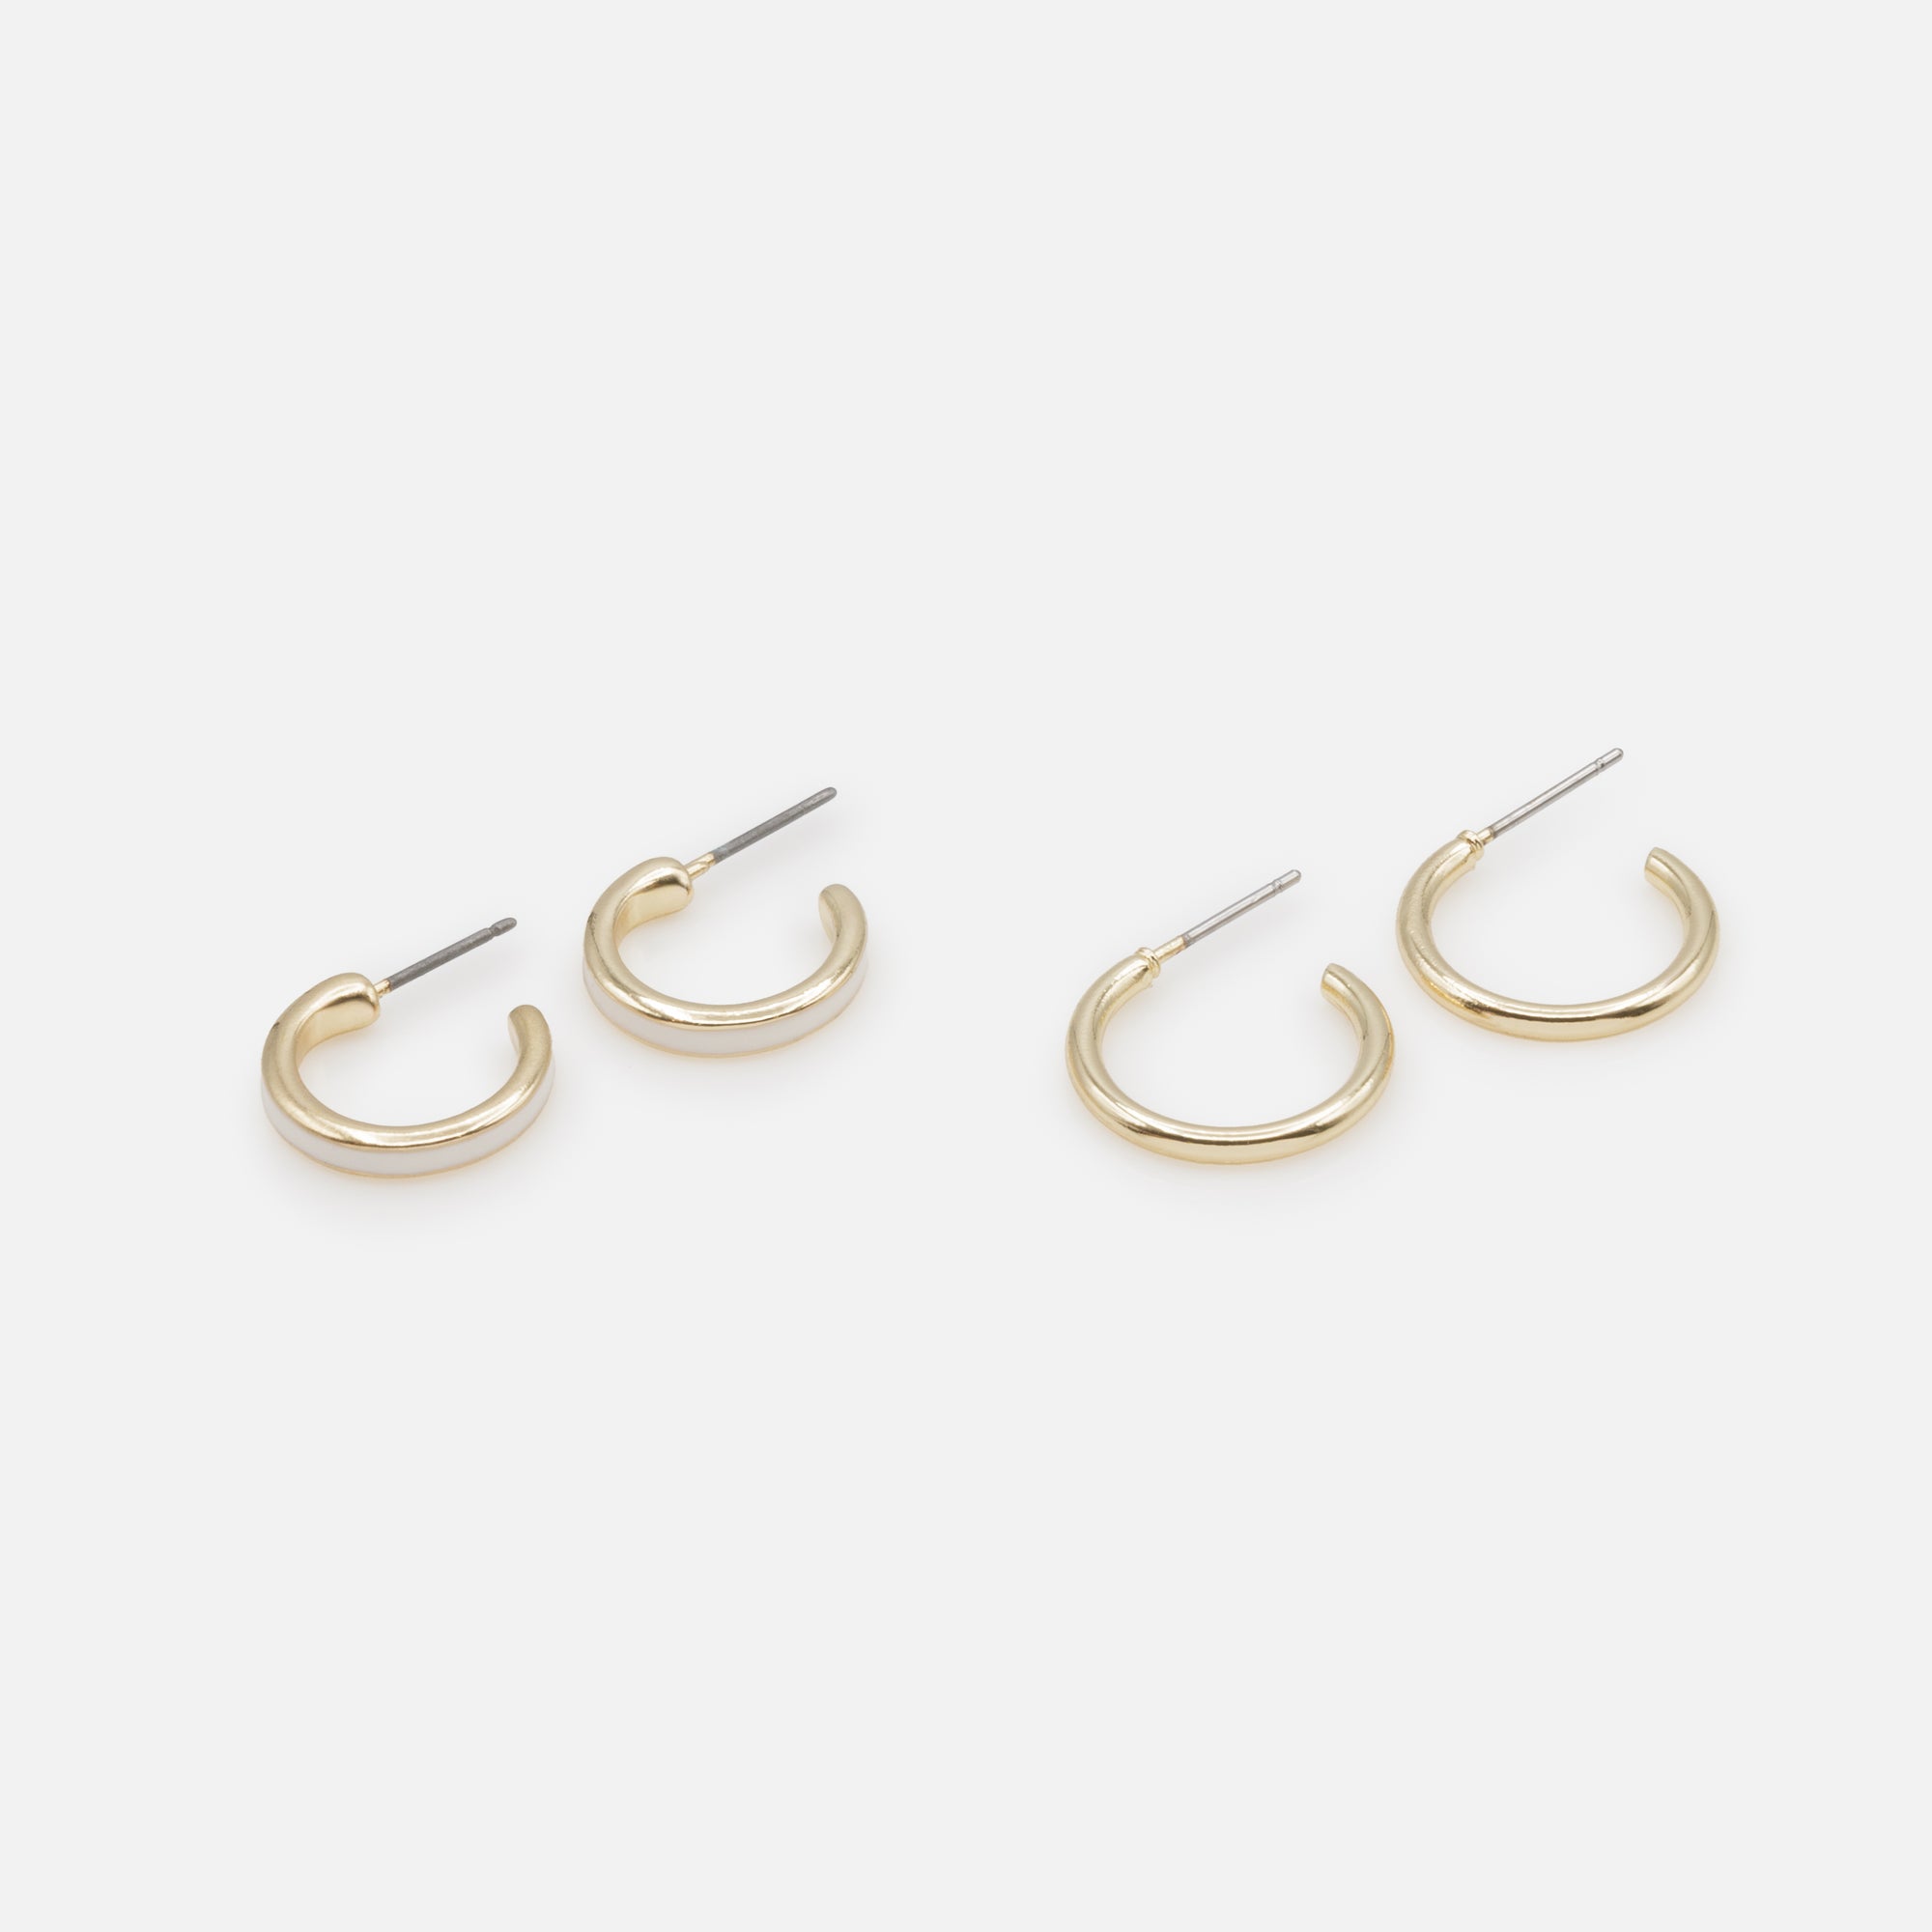 Duo of simple gold hoop earrings with white band